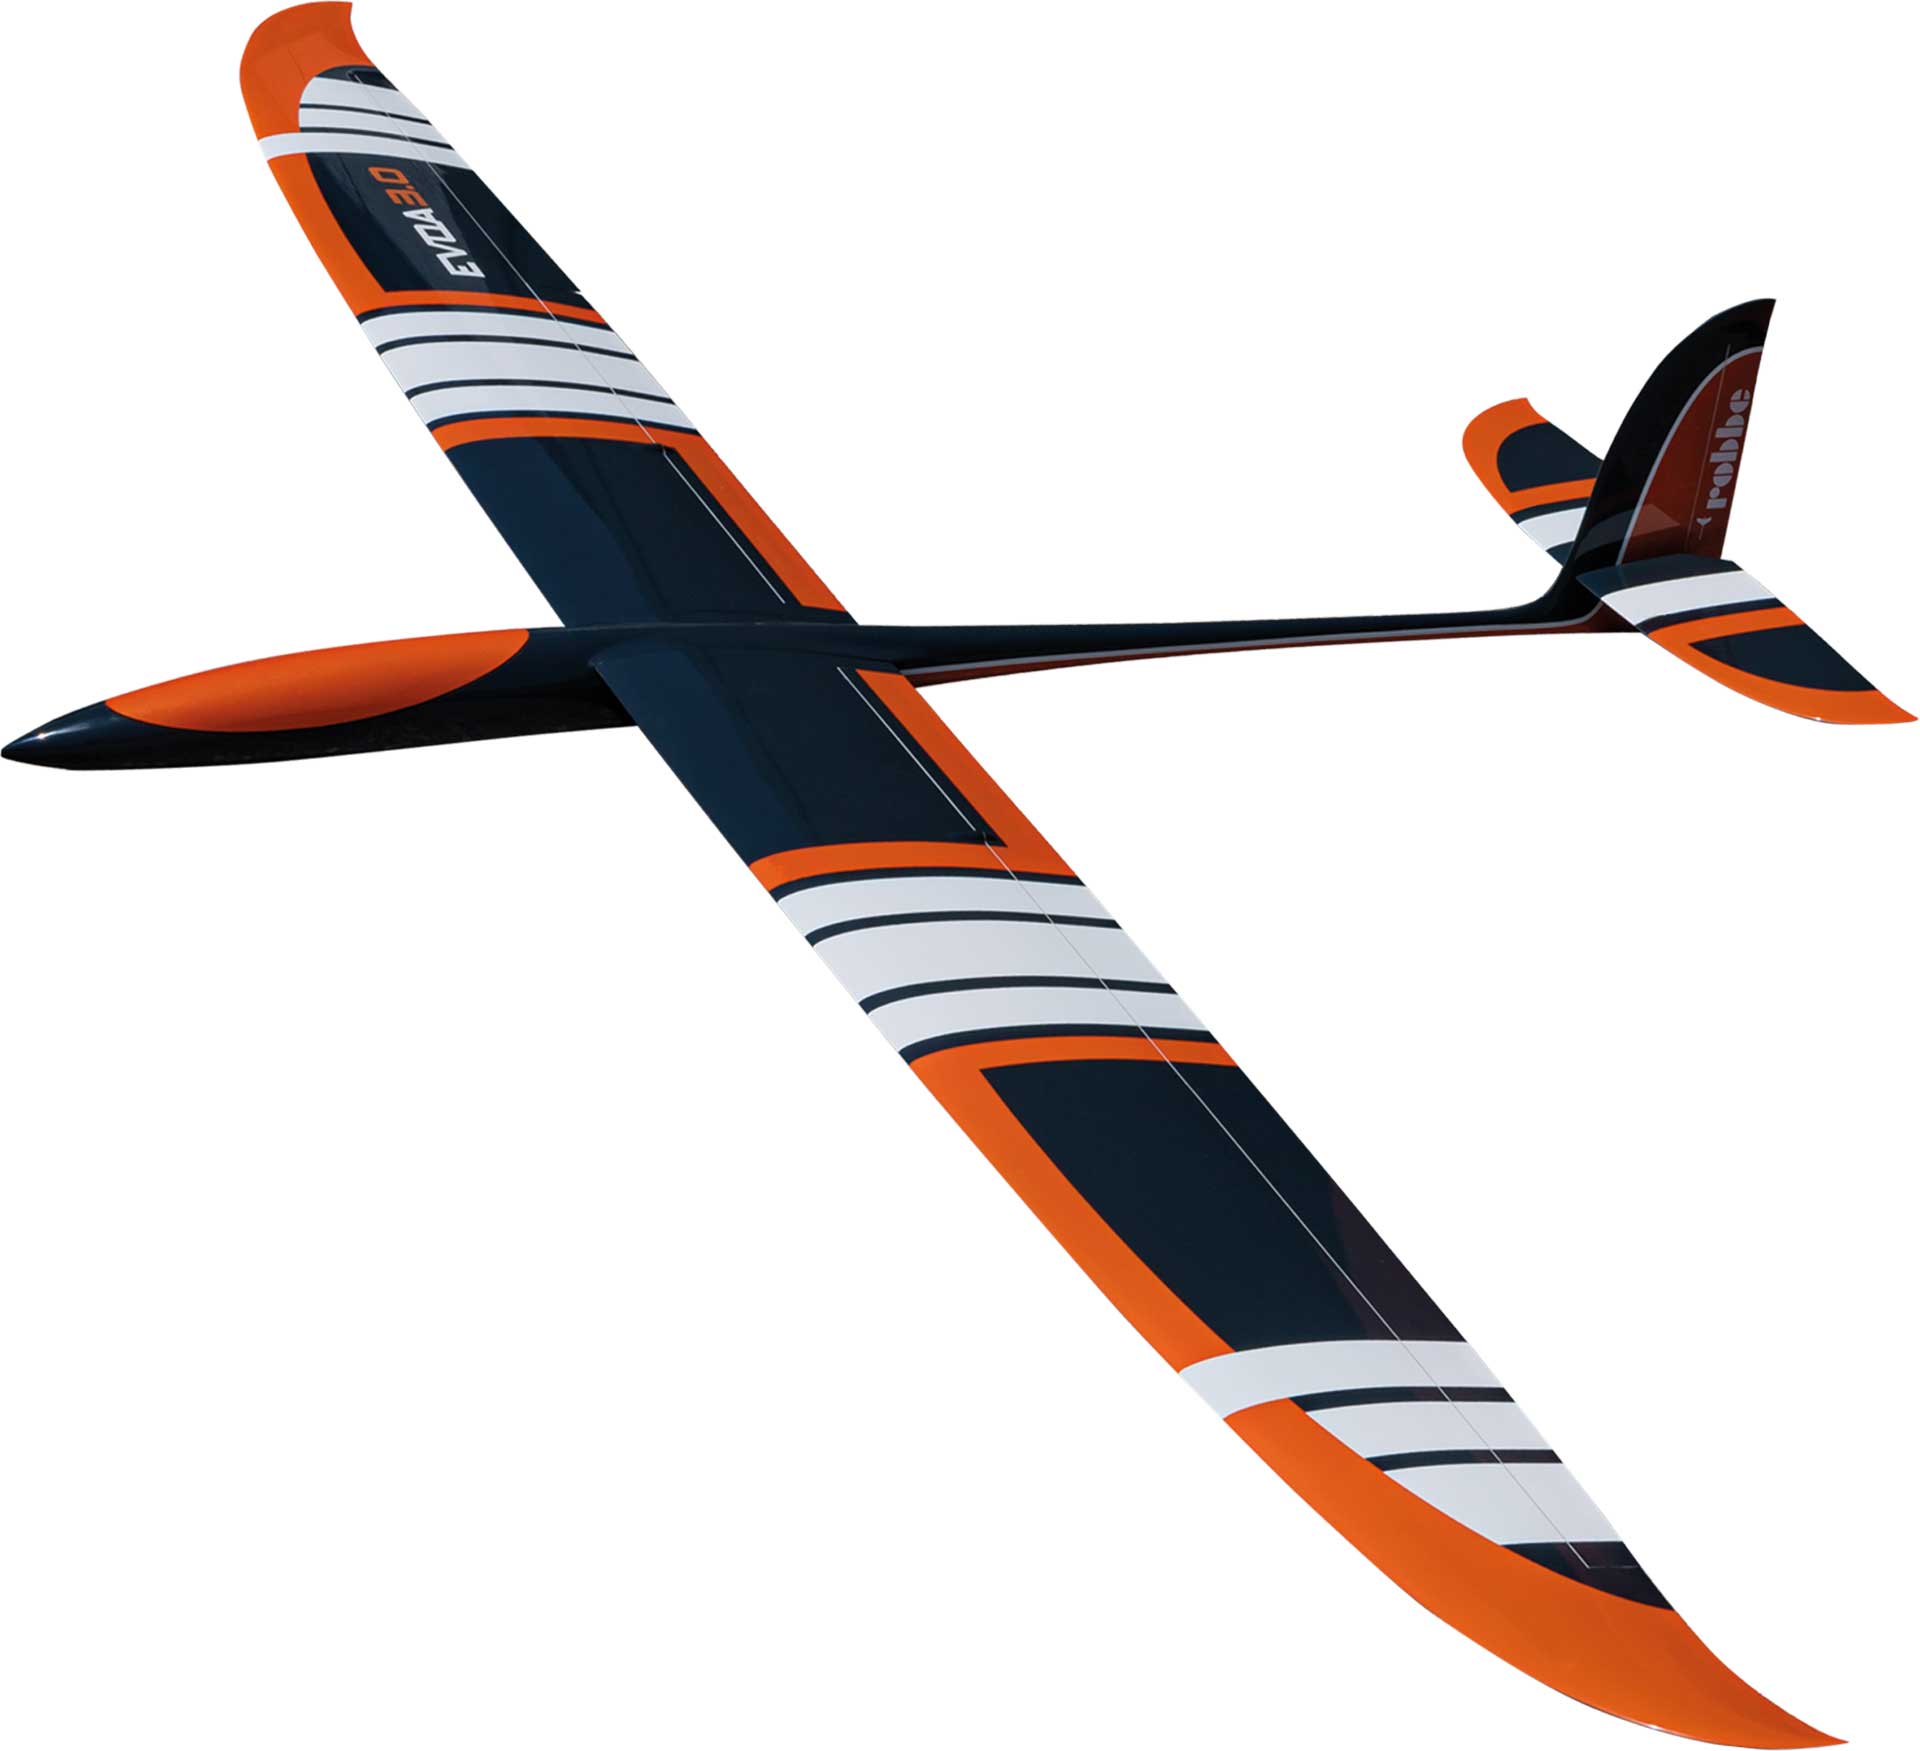 Robbe Modellsport EVOA 3.0 ARF VOLL-GFK "glider" HIGH PERFORMANCE GLIDER WITH 4-FLAP WING